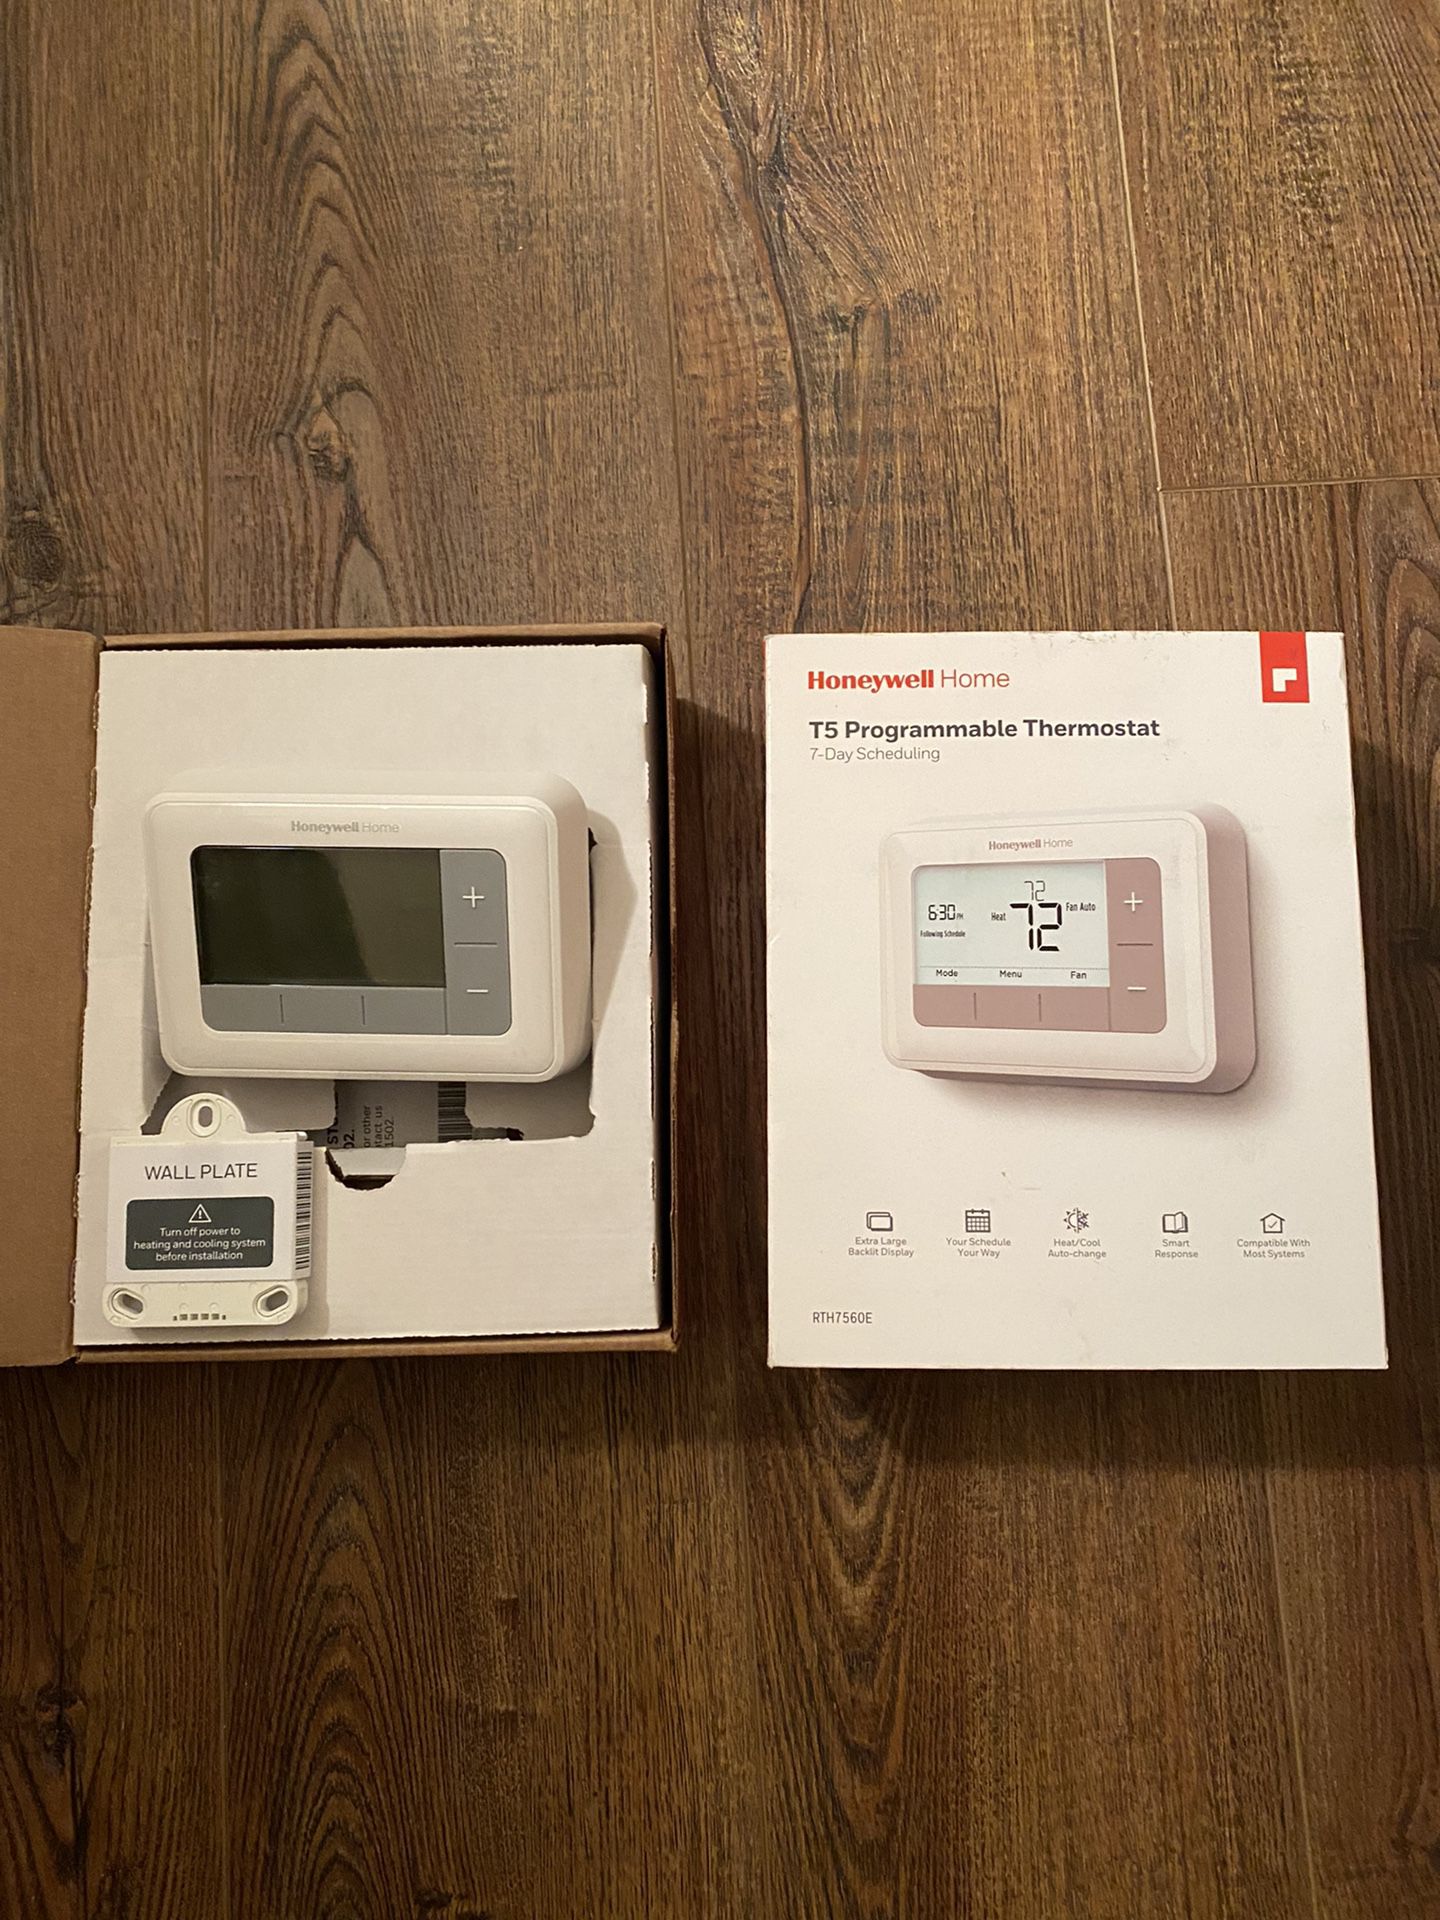 Honeywell Home T5 7 Day Scheduling Programmable Thermostat